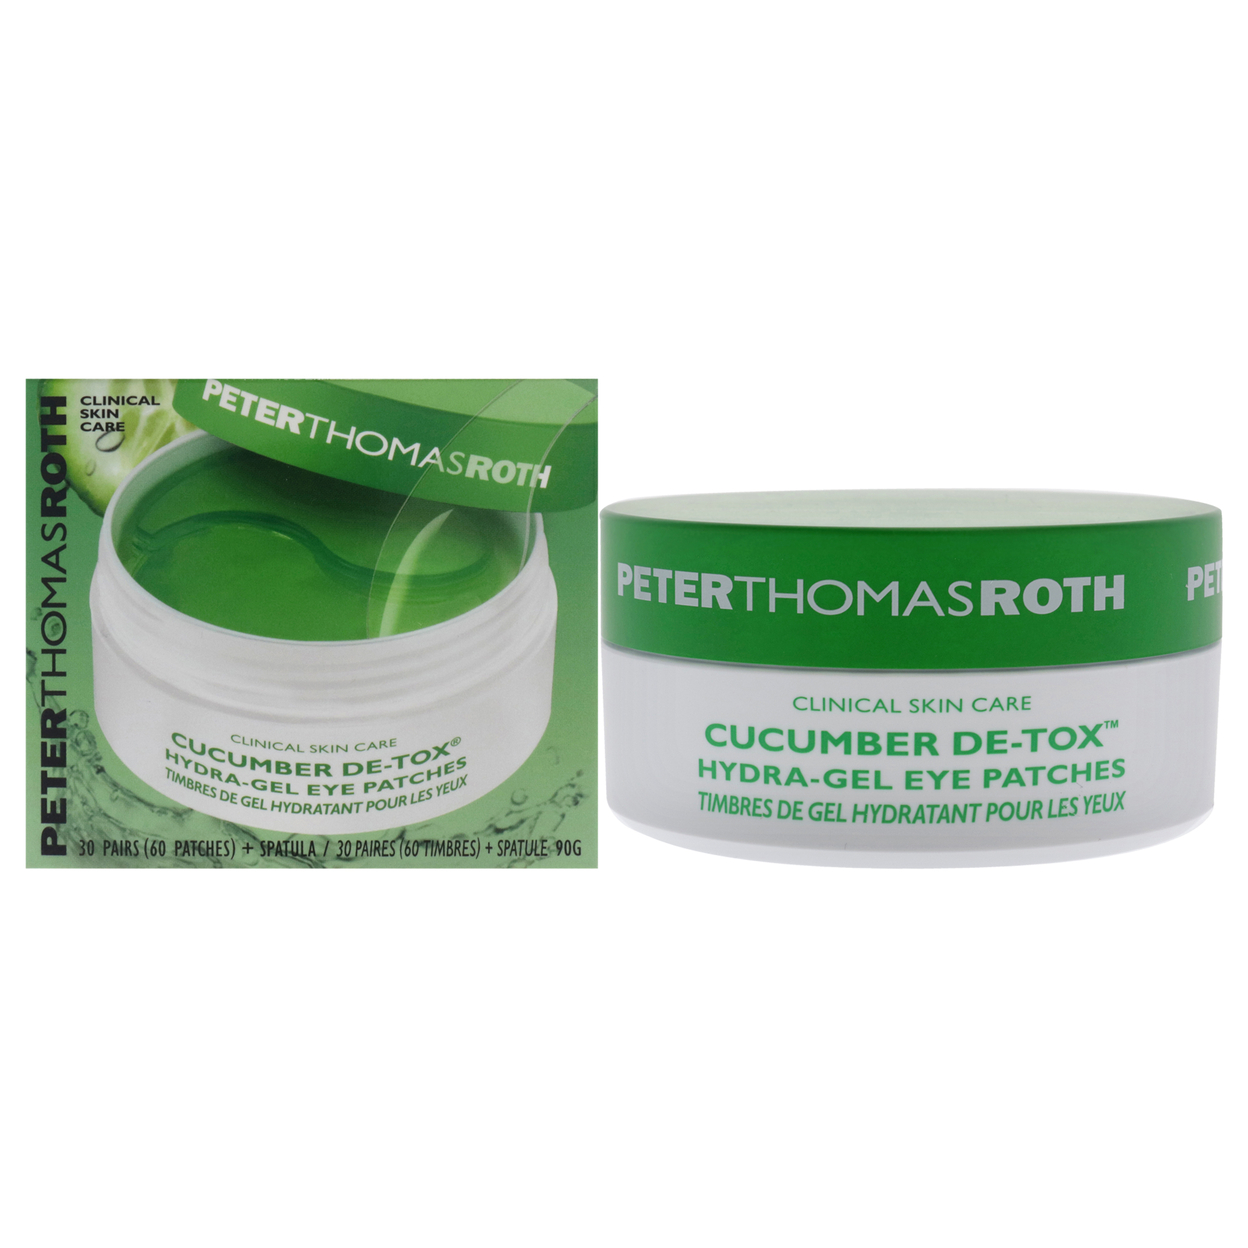 Peter Thomas Roth Cucumber De-Tox Hydra-Gel Eye Patches 60 Pc